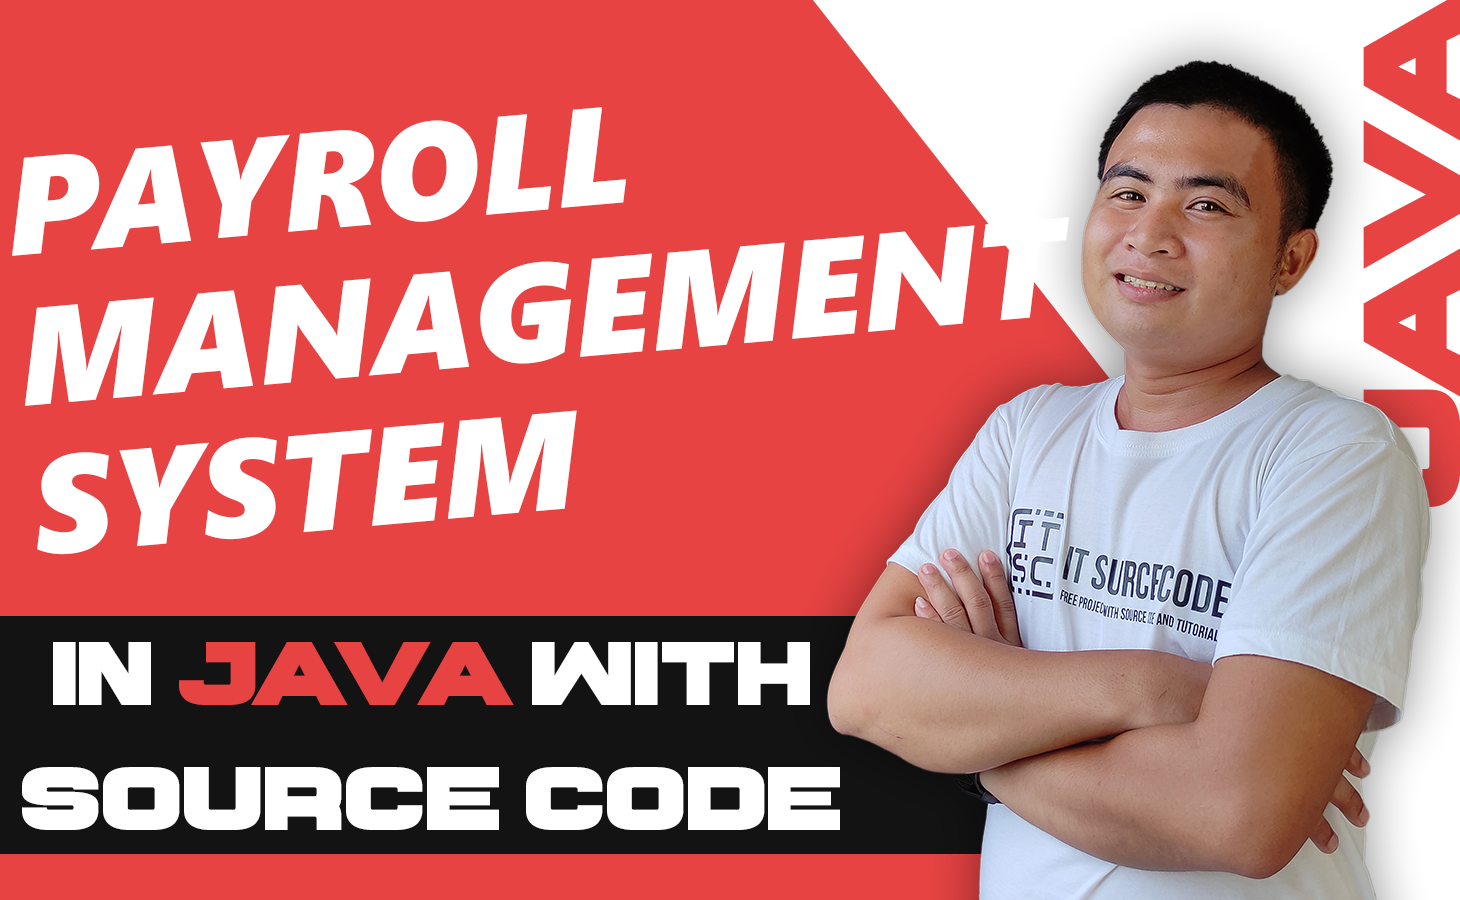 Payroll Management System Project In Java With Source Code